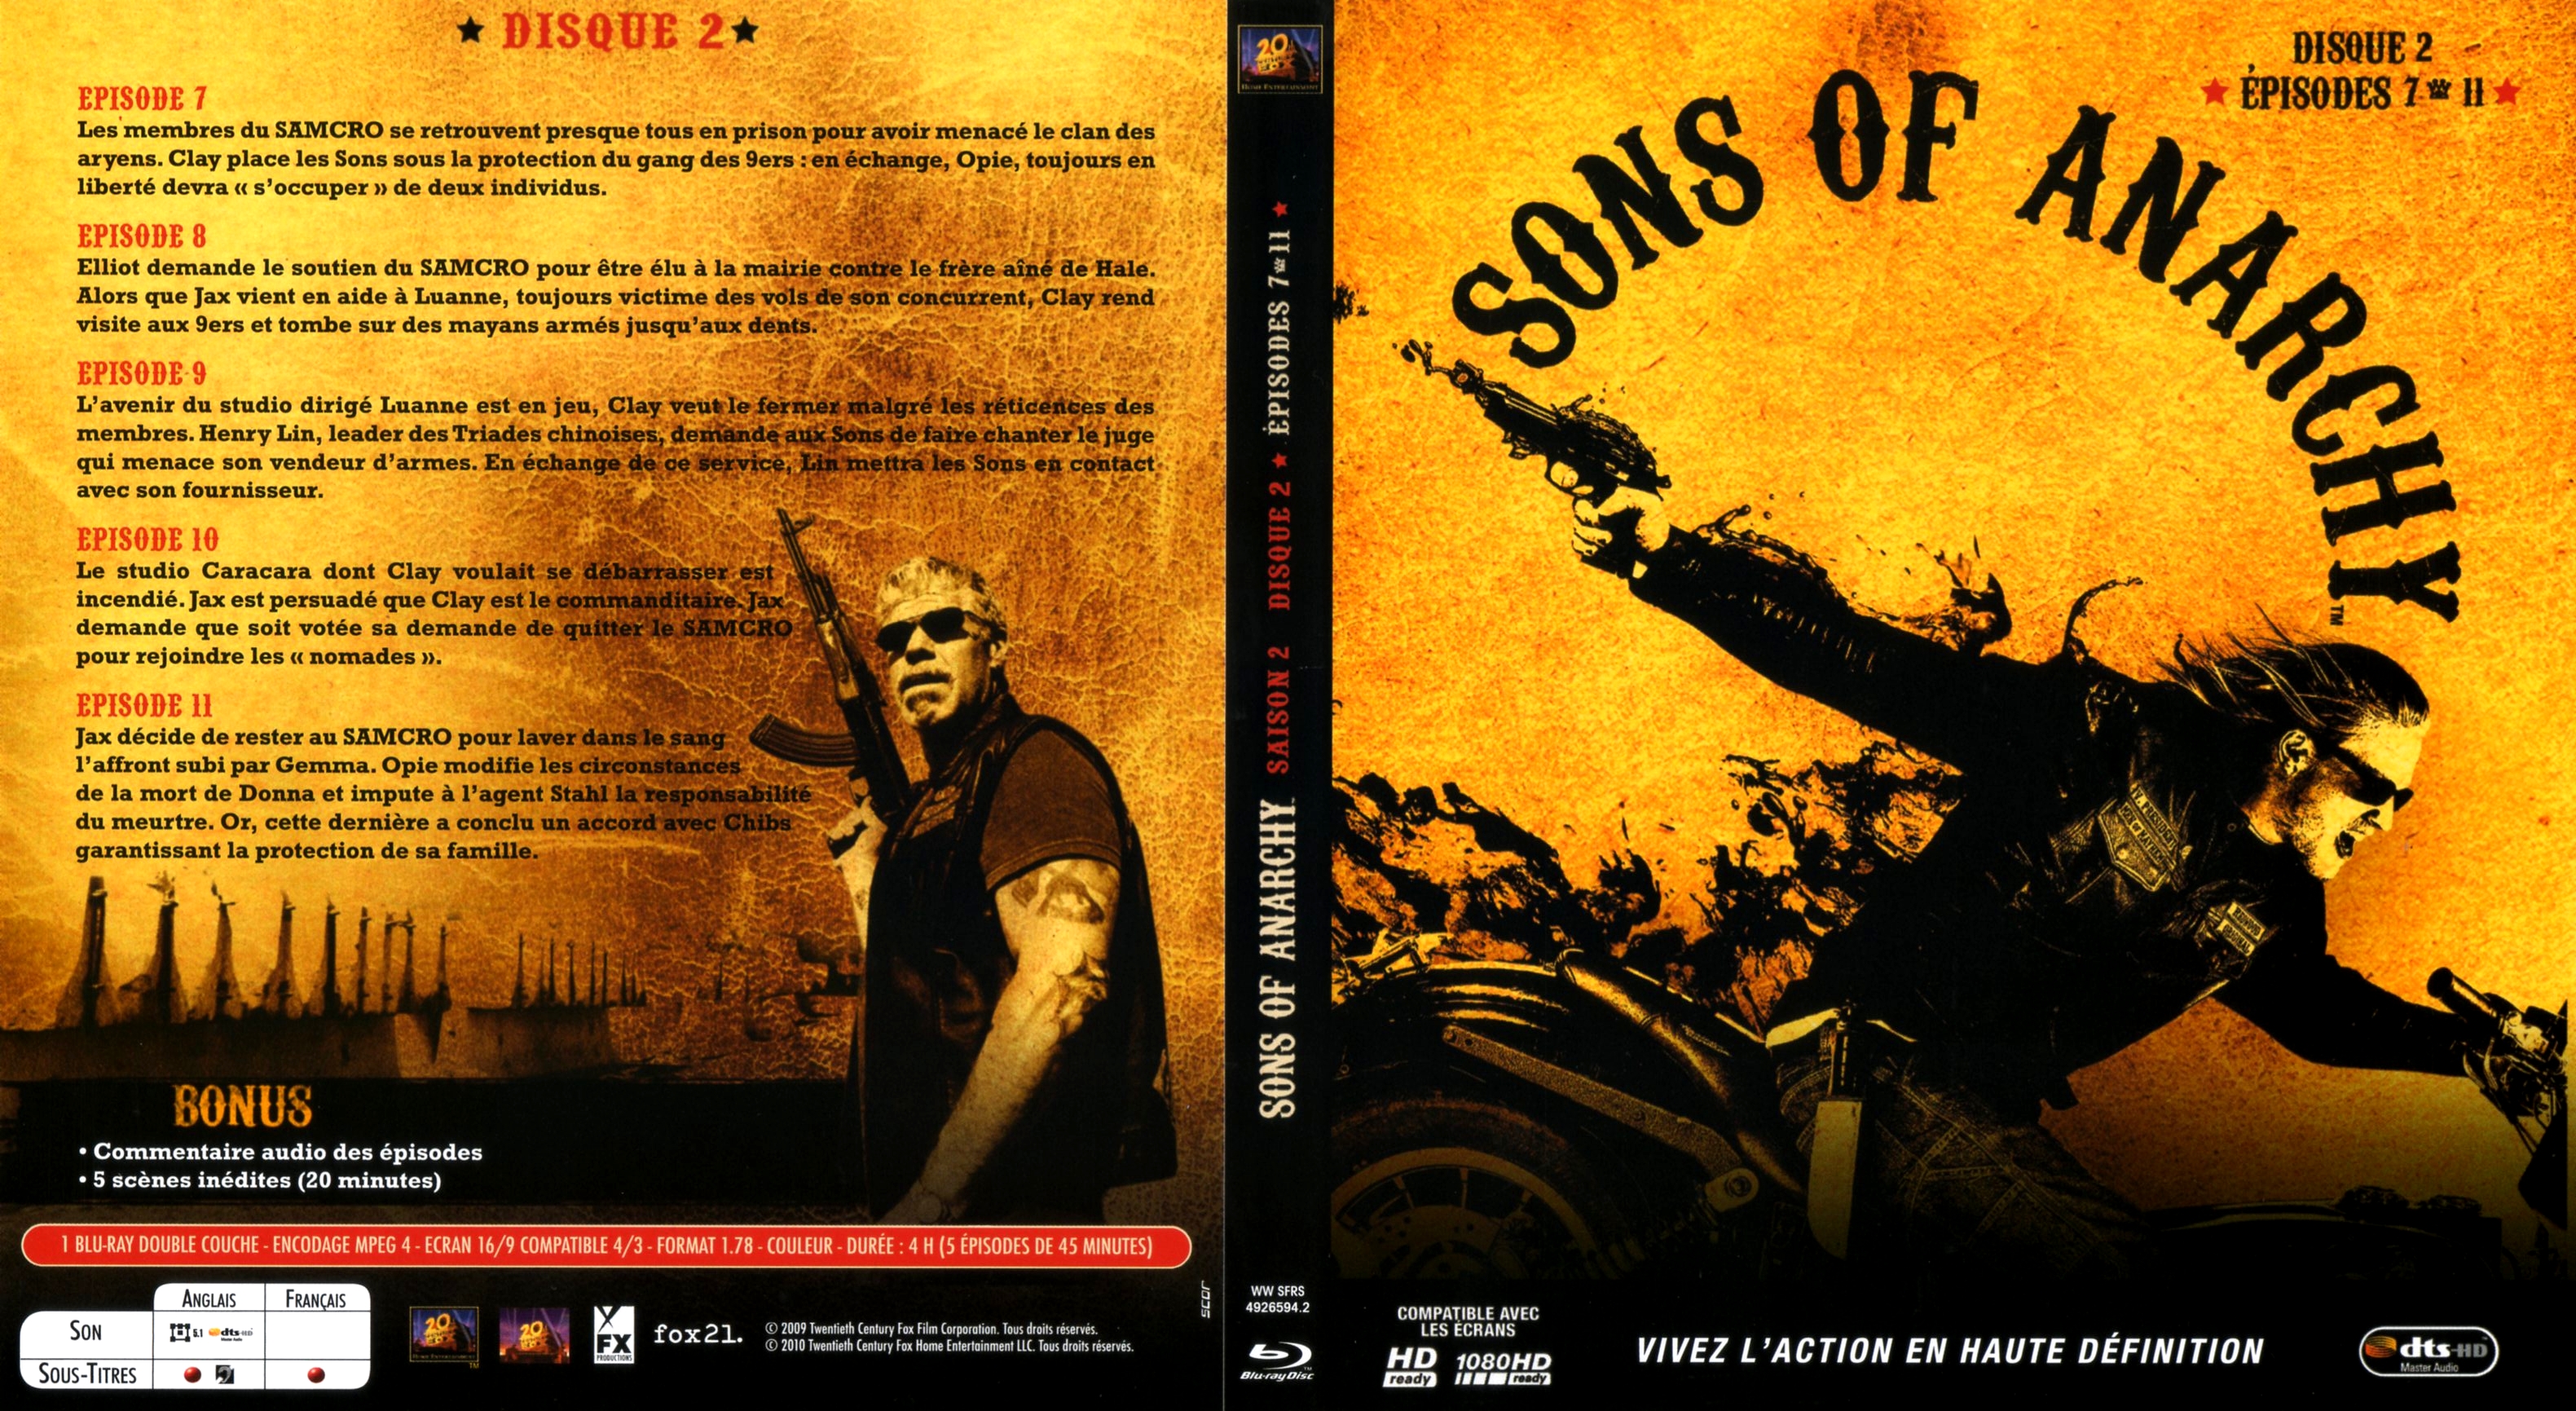 Jaquette DVD Sons of anarchy Saison 2 DISC 2 (BLU-RAY)